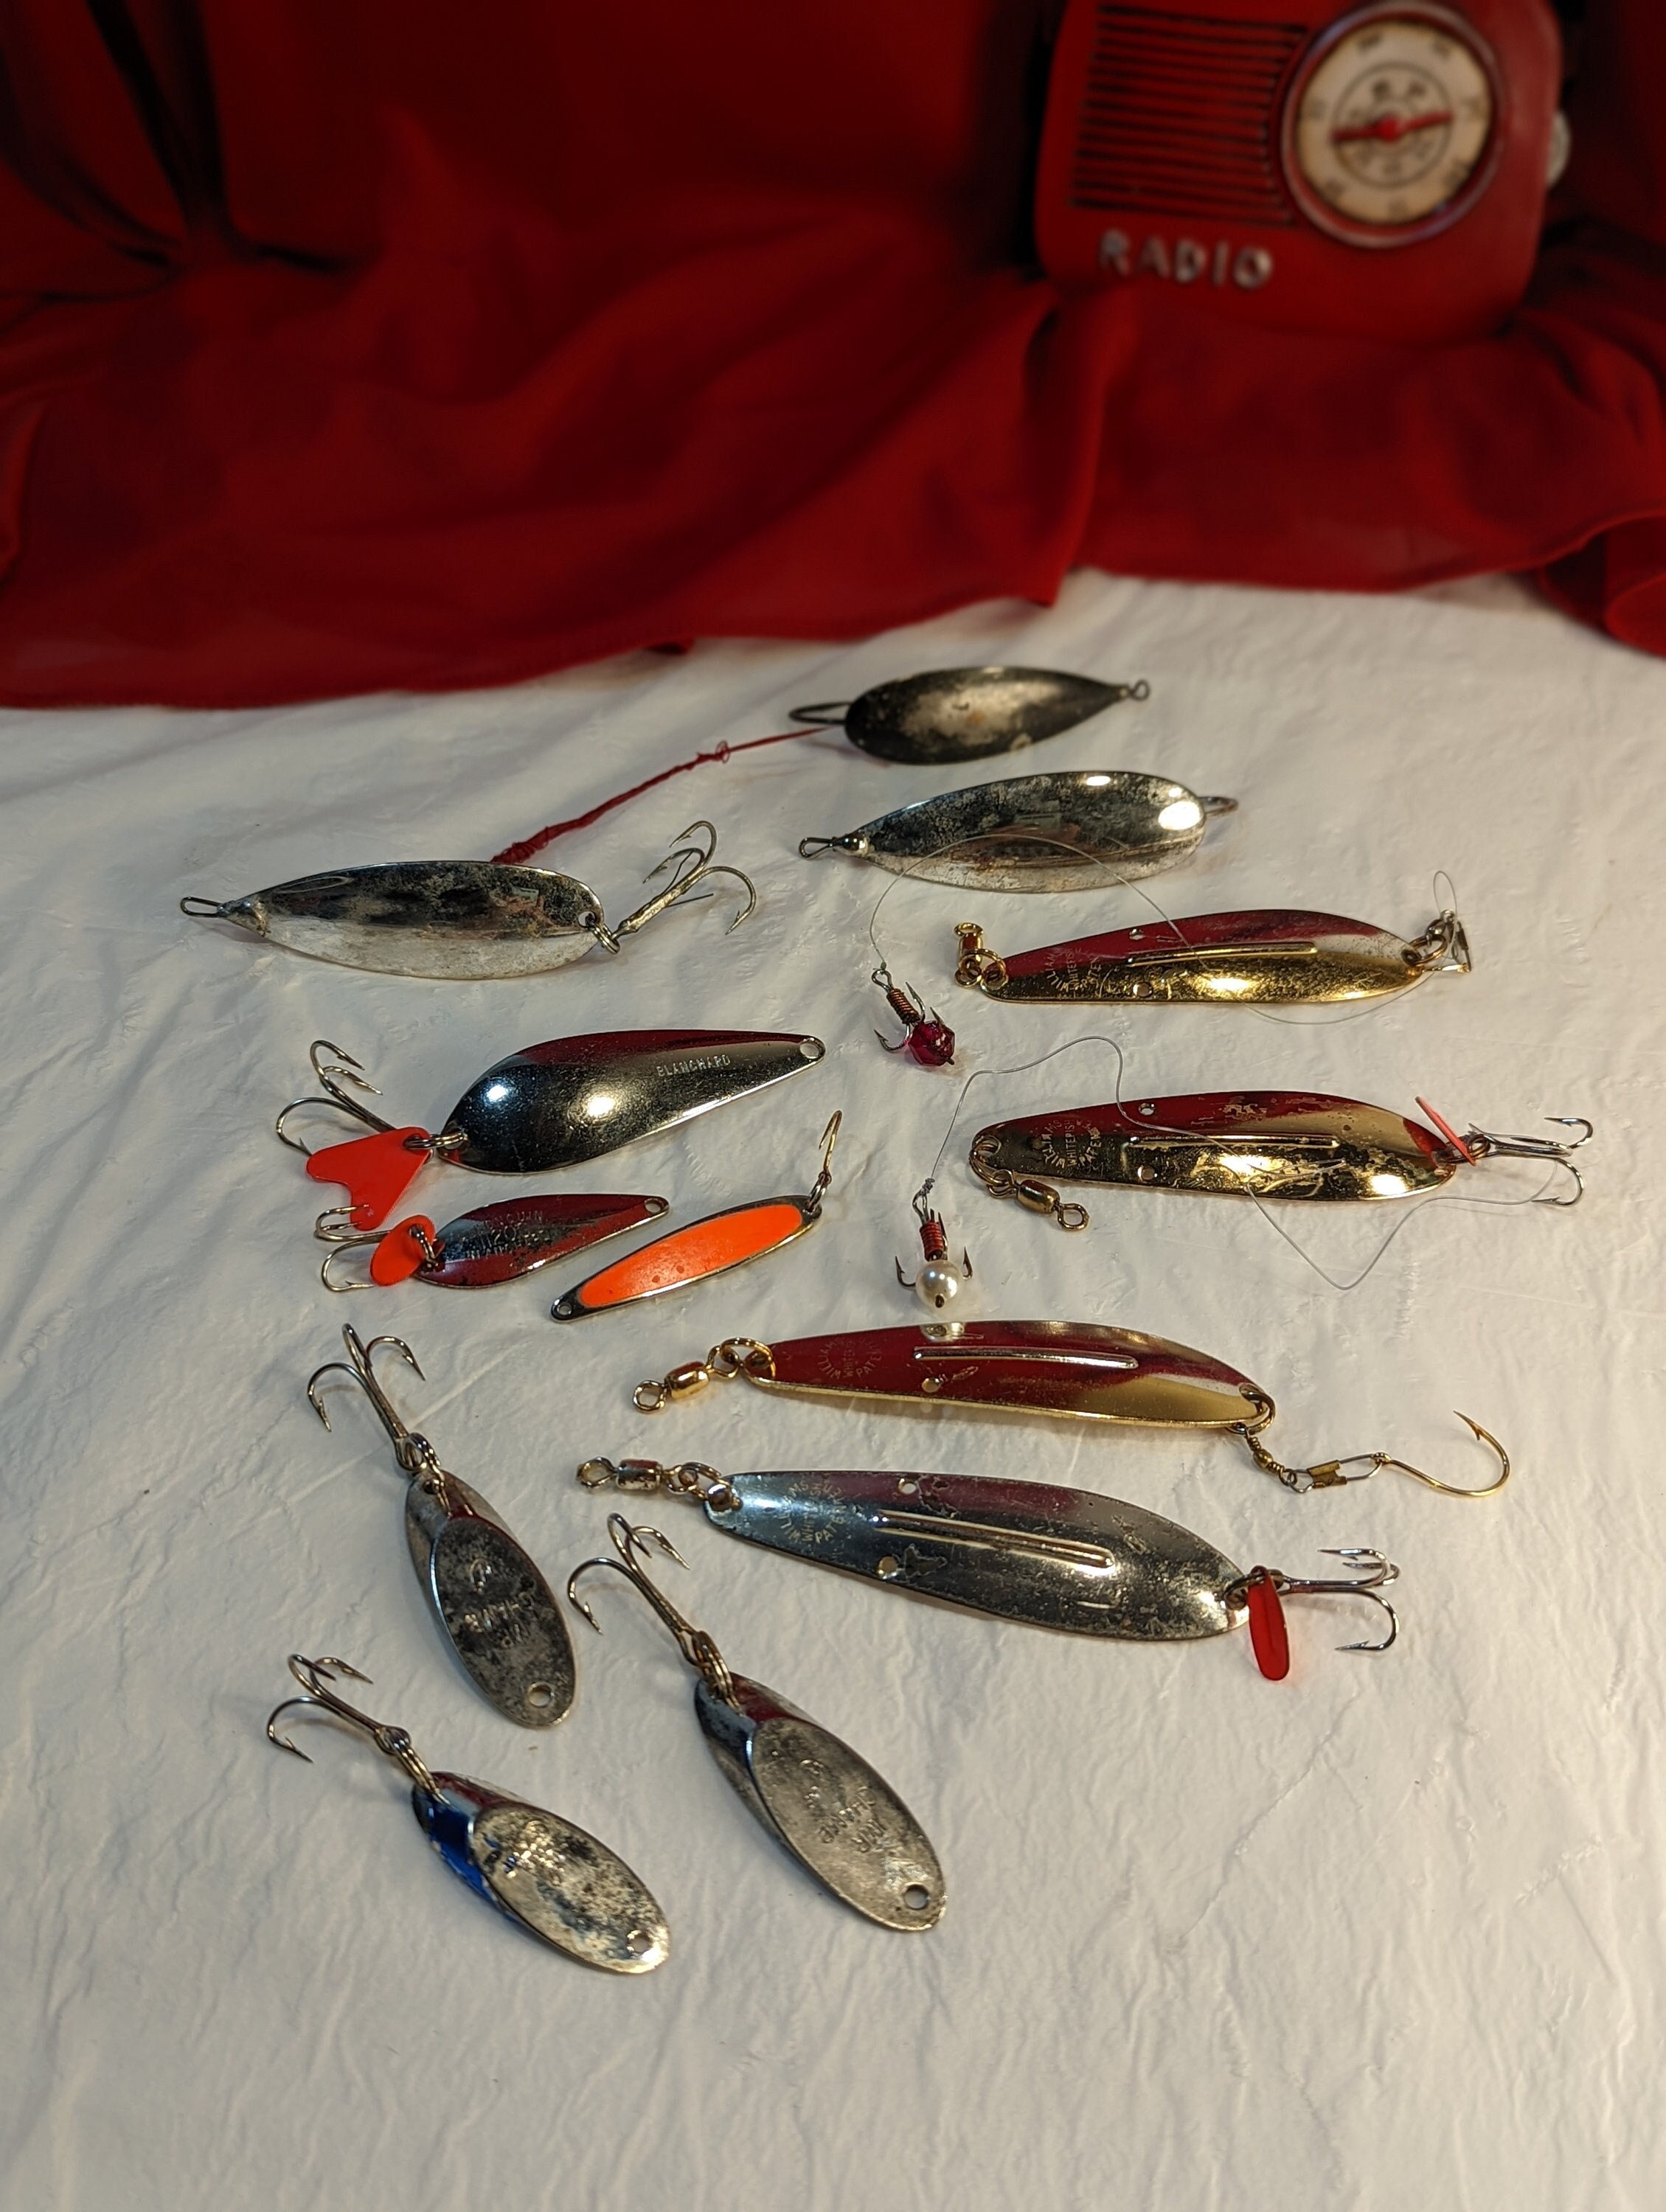 Fishing Lure Display Case Cabinet